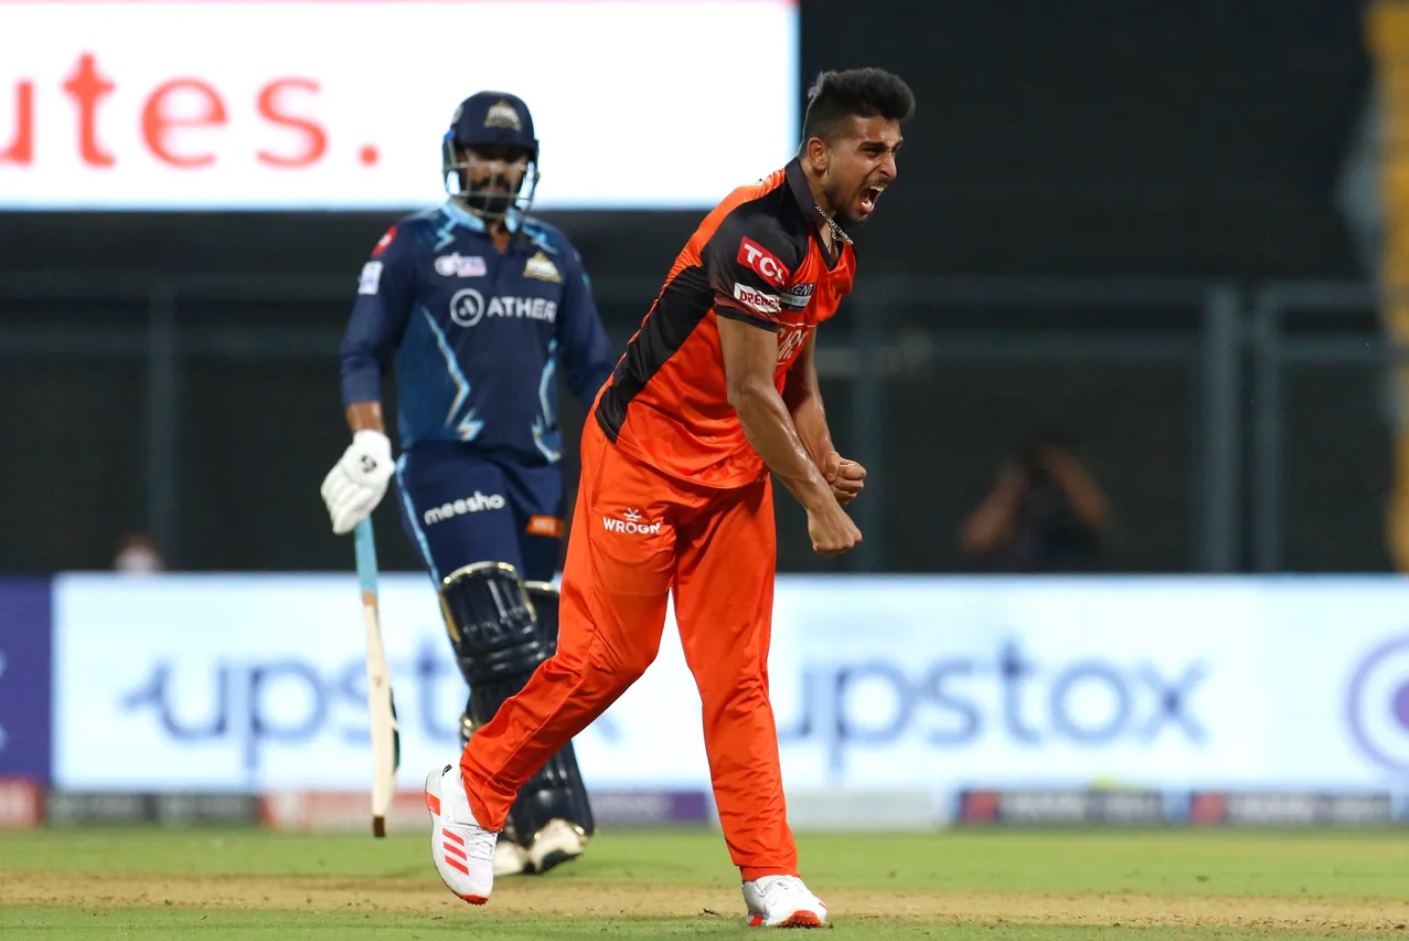 IPL 2022 | India should include Umran Malik in T20I squad for the World Cup to be held later this year, opines Graeme Swann